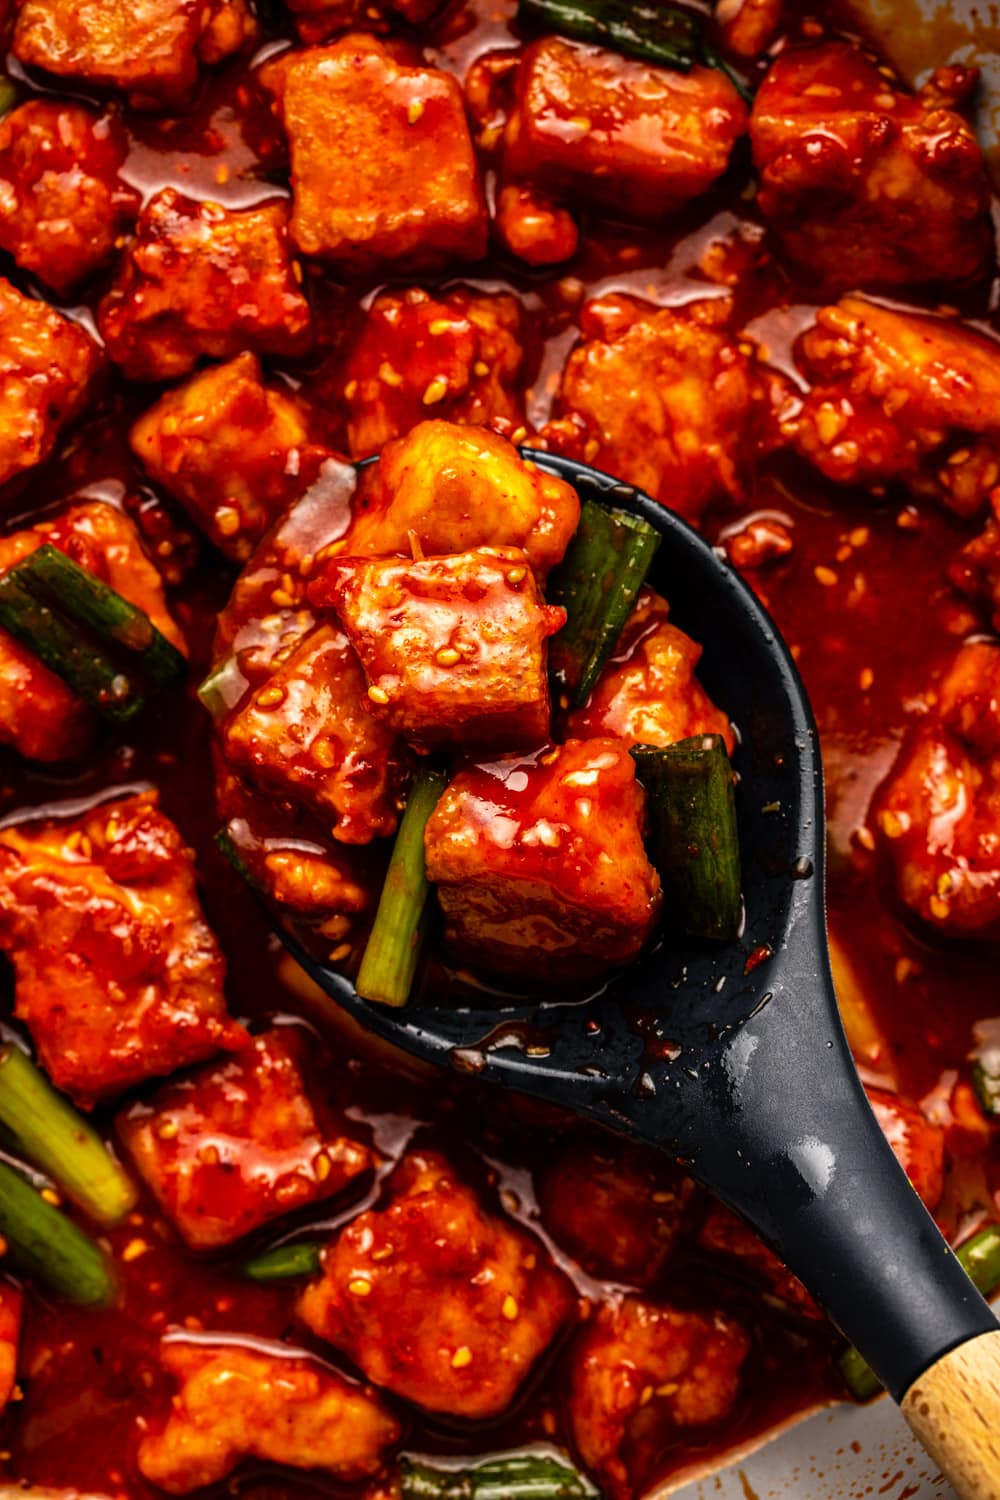 a zoomed in image of a serving spoon scooping up gochujang tofu from the pan